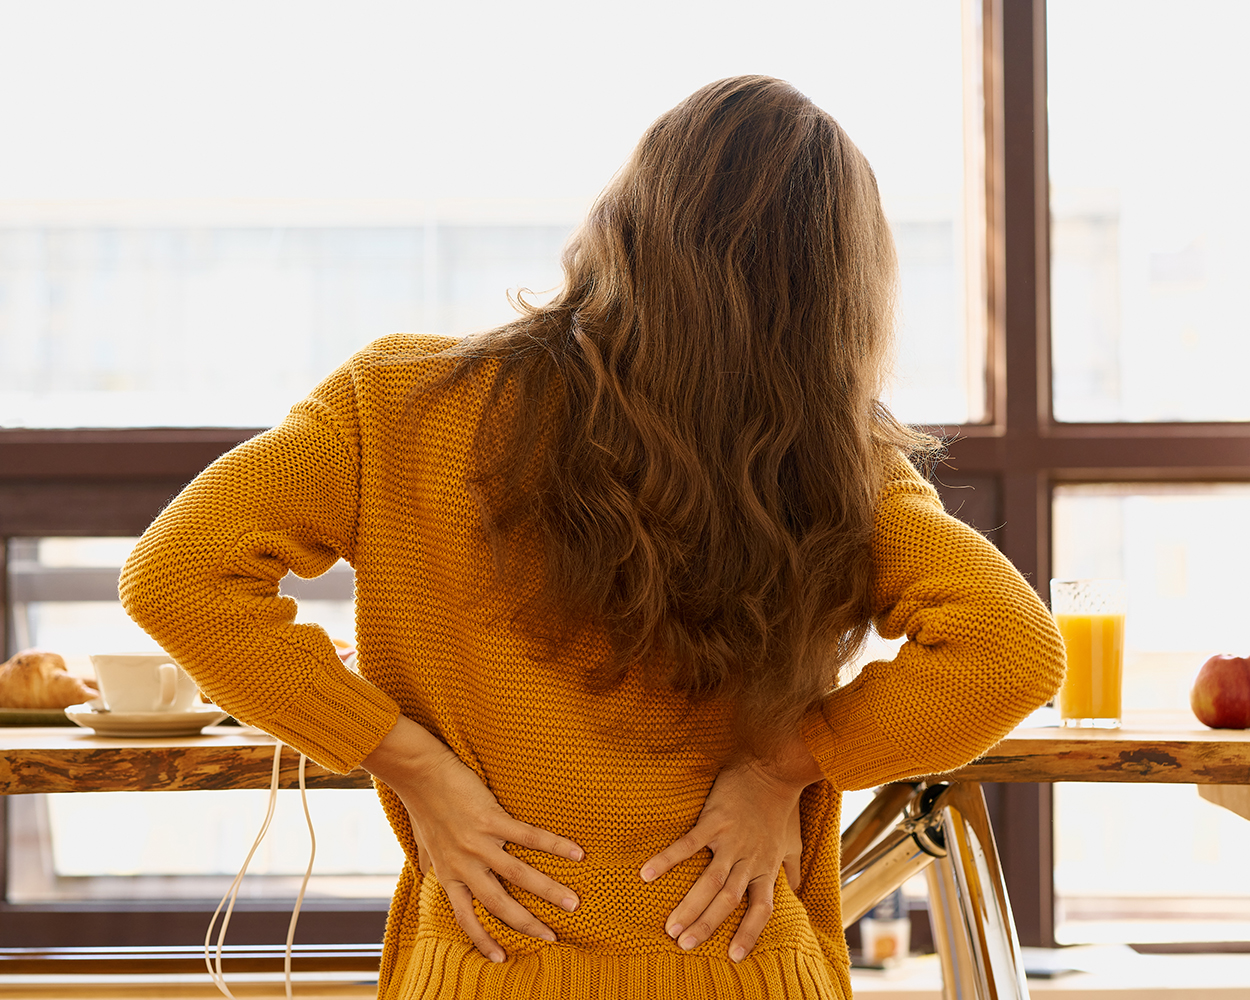 Back view of young woman with long red hair holding lower back in discomfort.